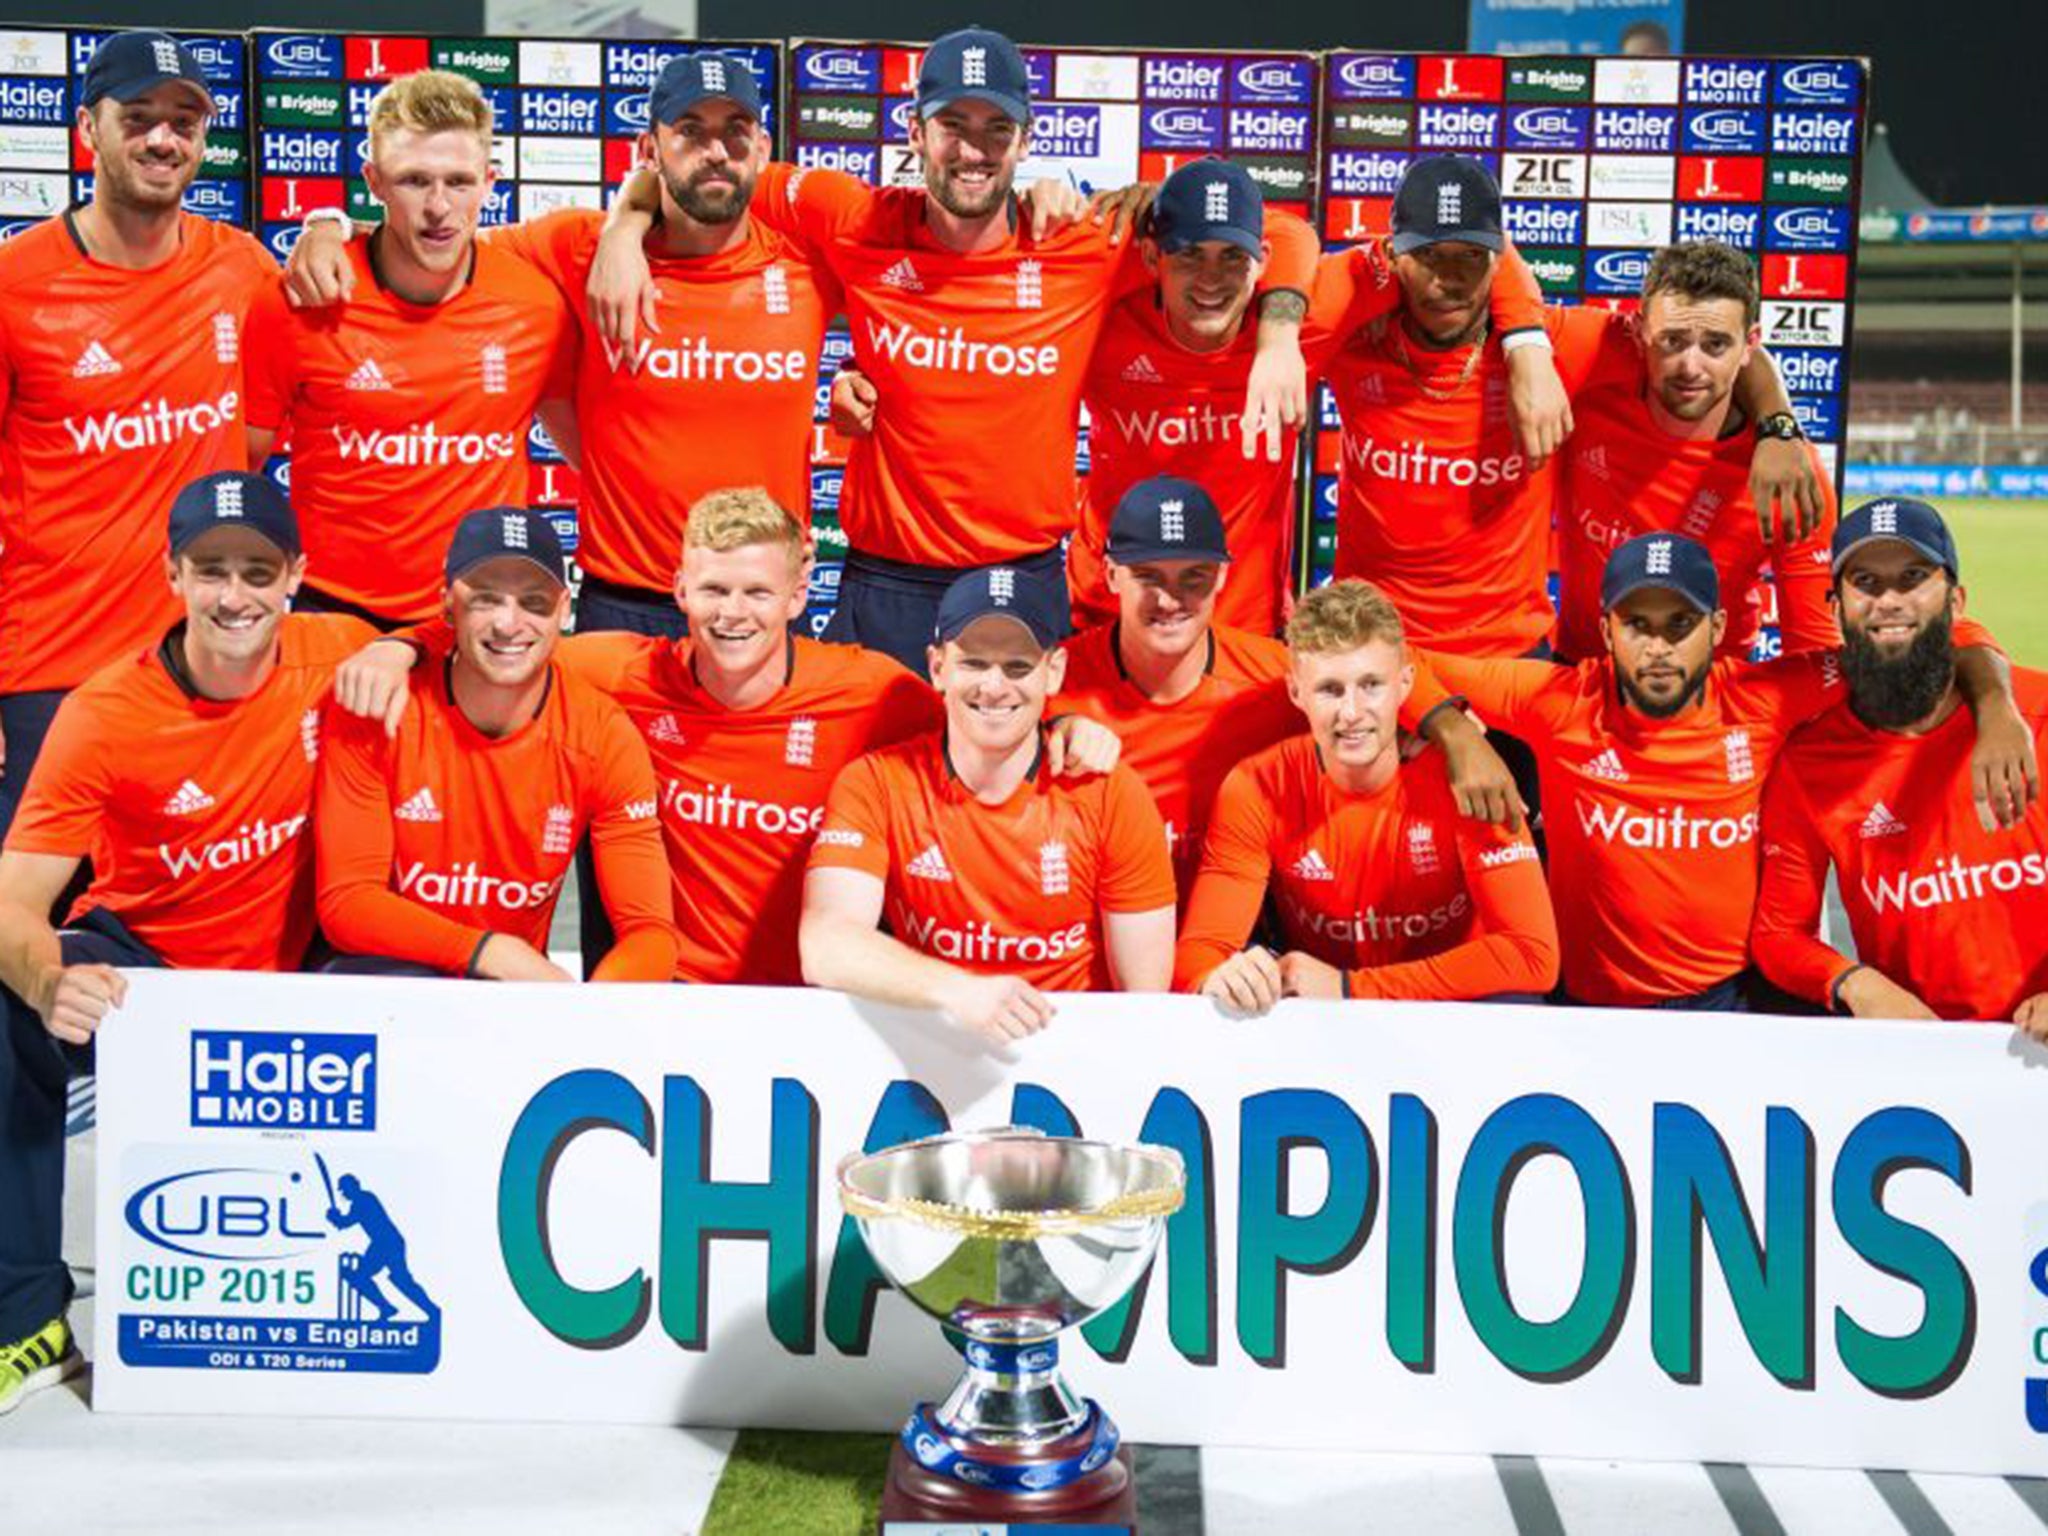 England celebrate with their trophy last night after winning the series against Pakistan 3-0